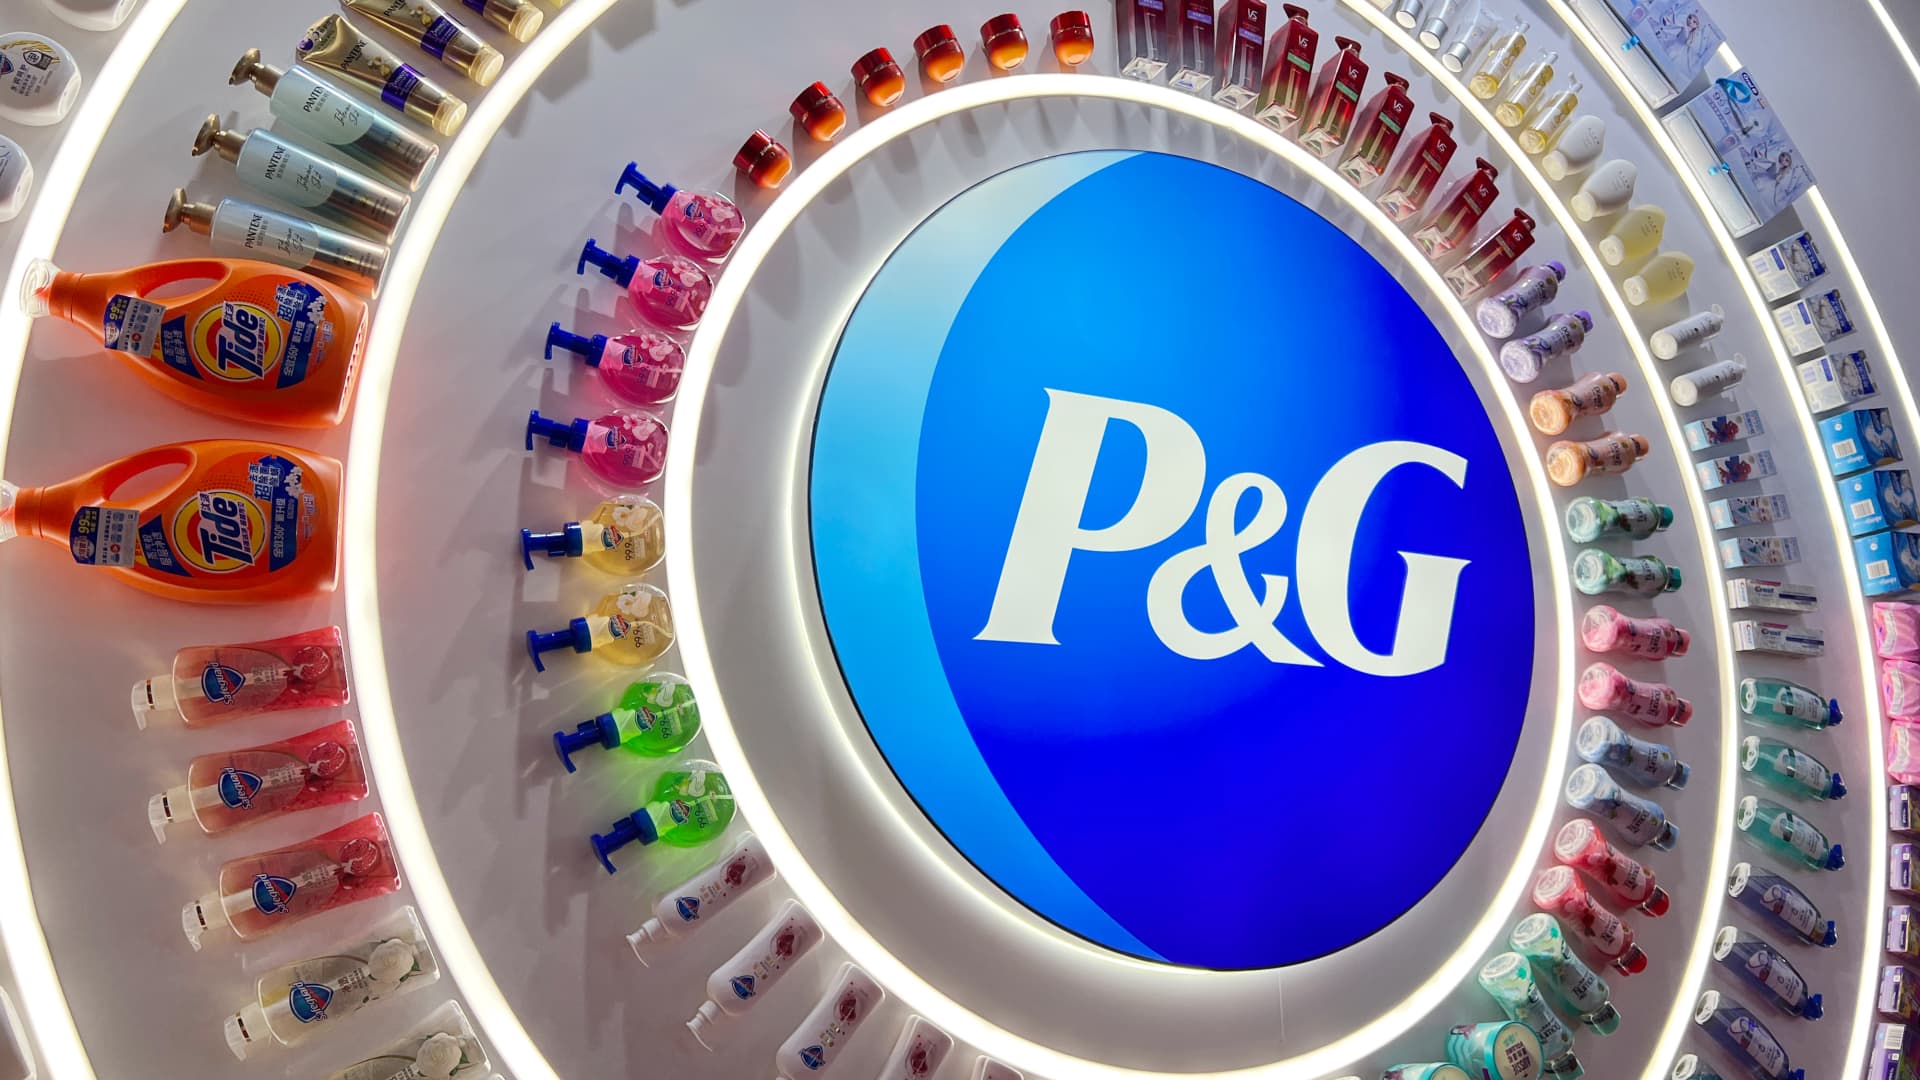 Procter & Gamble’s strategic pricing shift should accelerate business growth this year [Video]